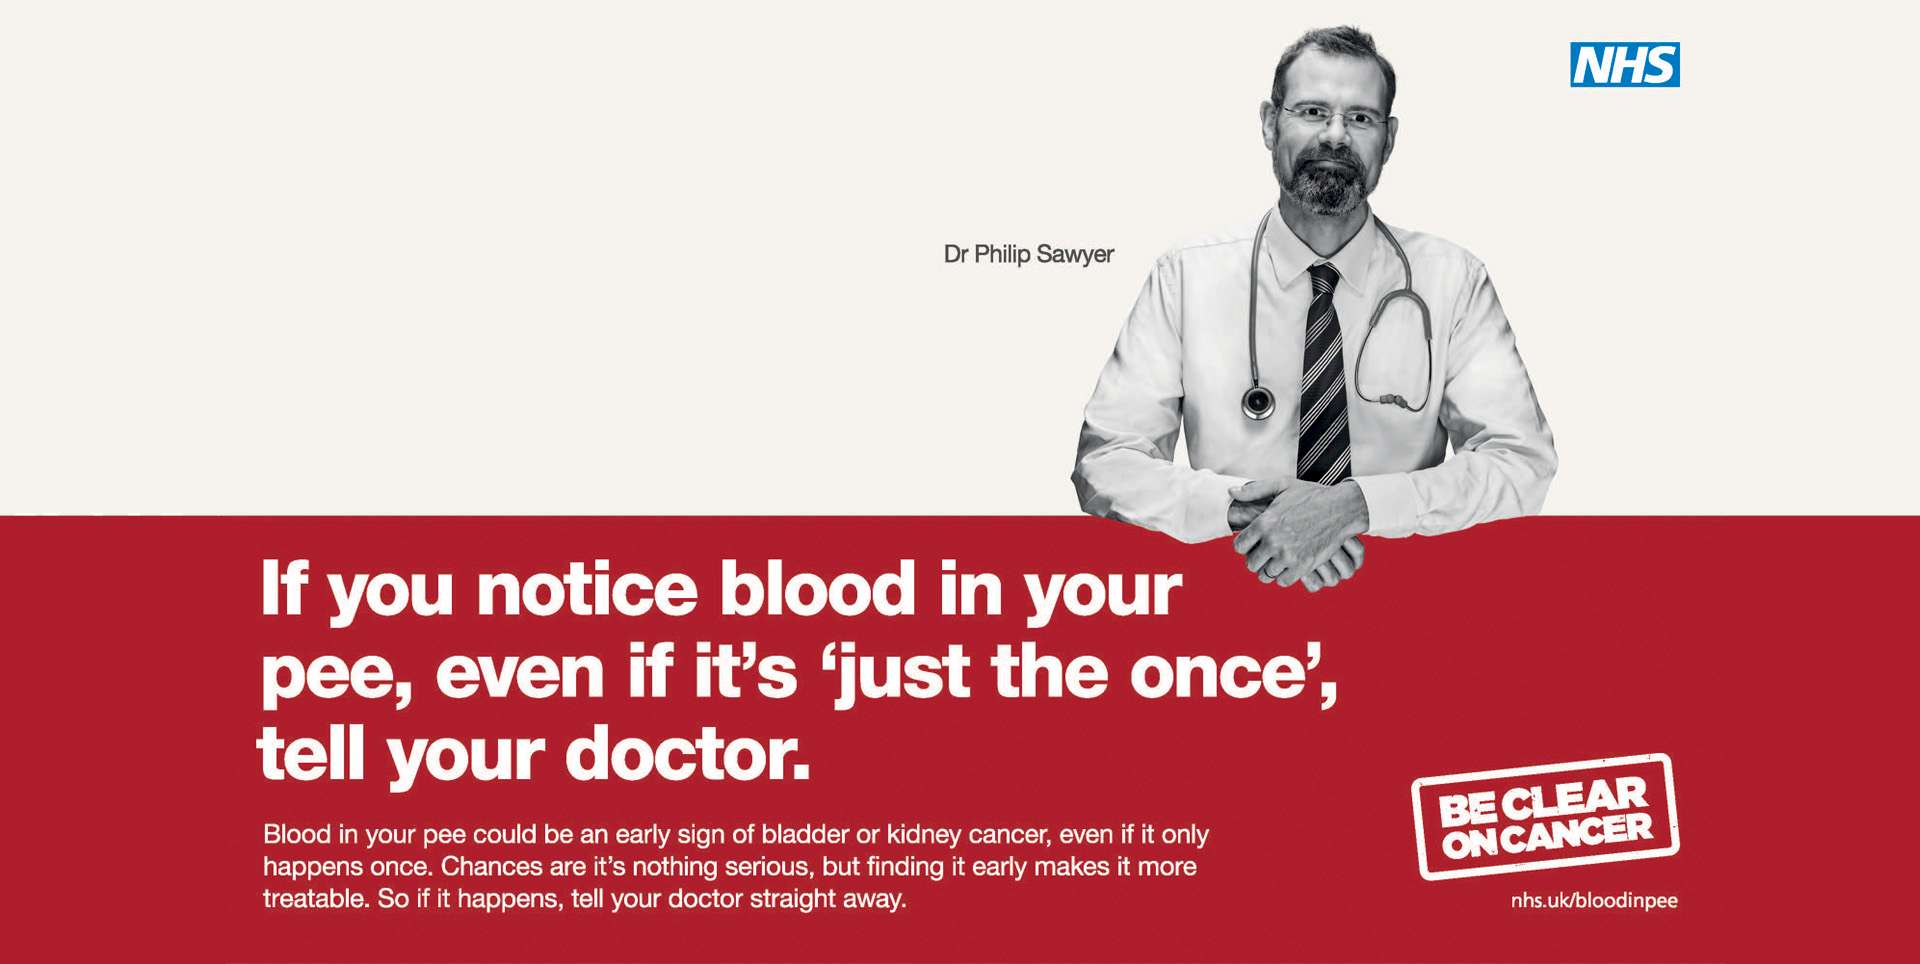 Blood in pee campaign image